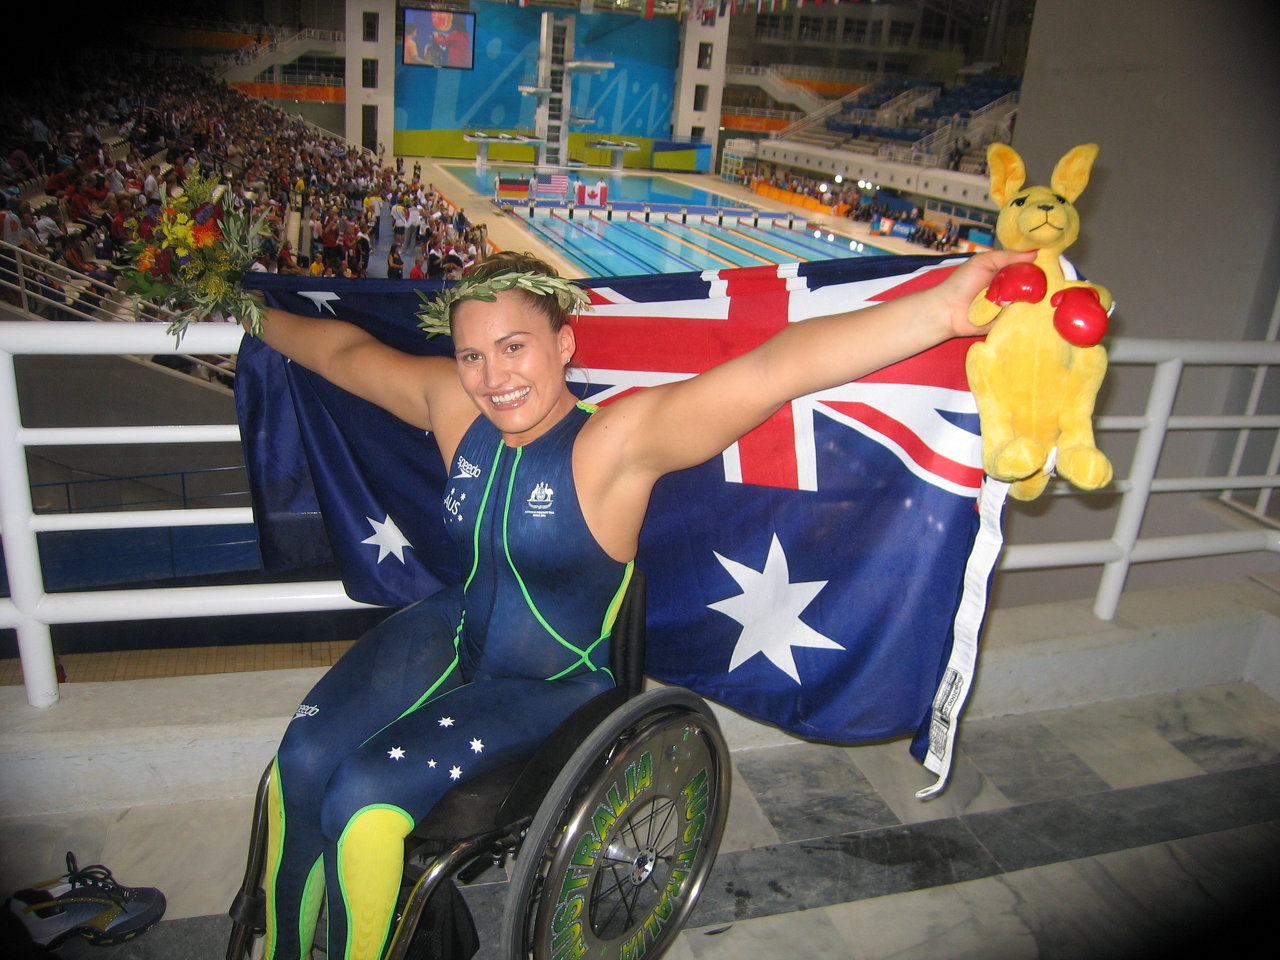 Marayke Jonkers set up her charity following a successful career as a swimmer, including winning medals at the Athens 2004 and Beijing 2008 Paralympics ©Marayke Jonkers